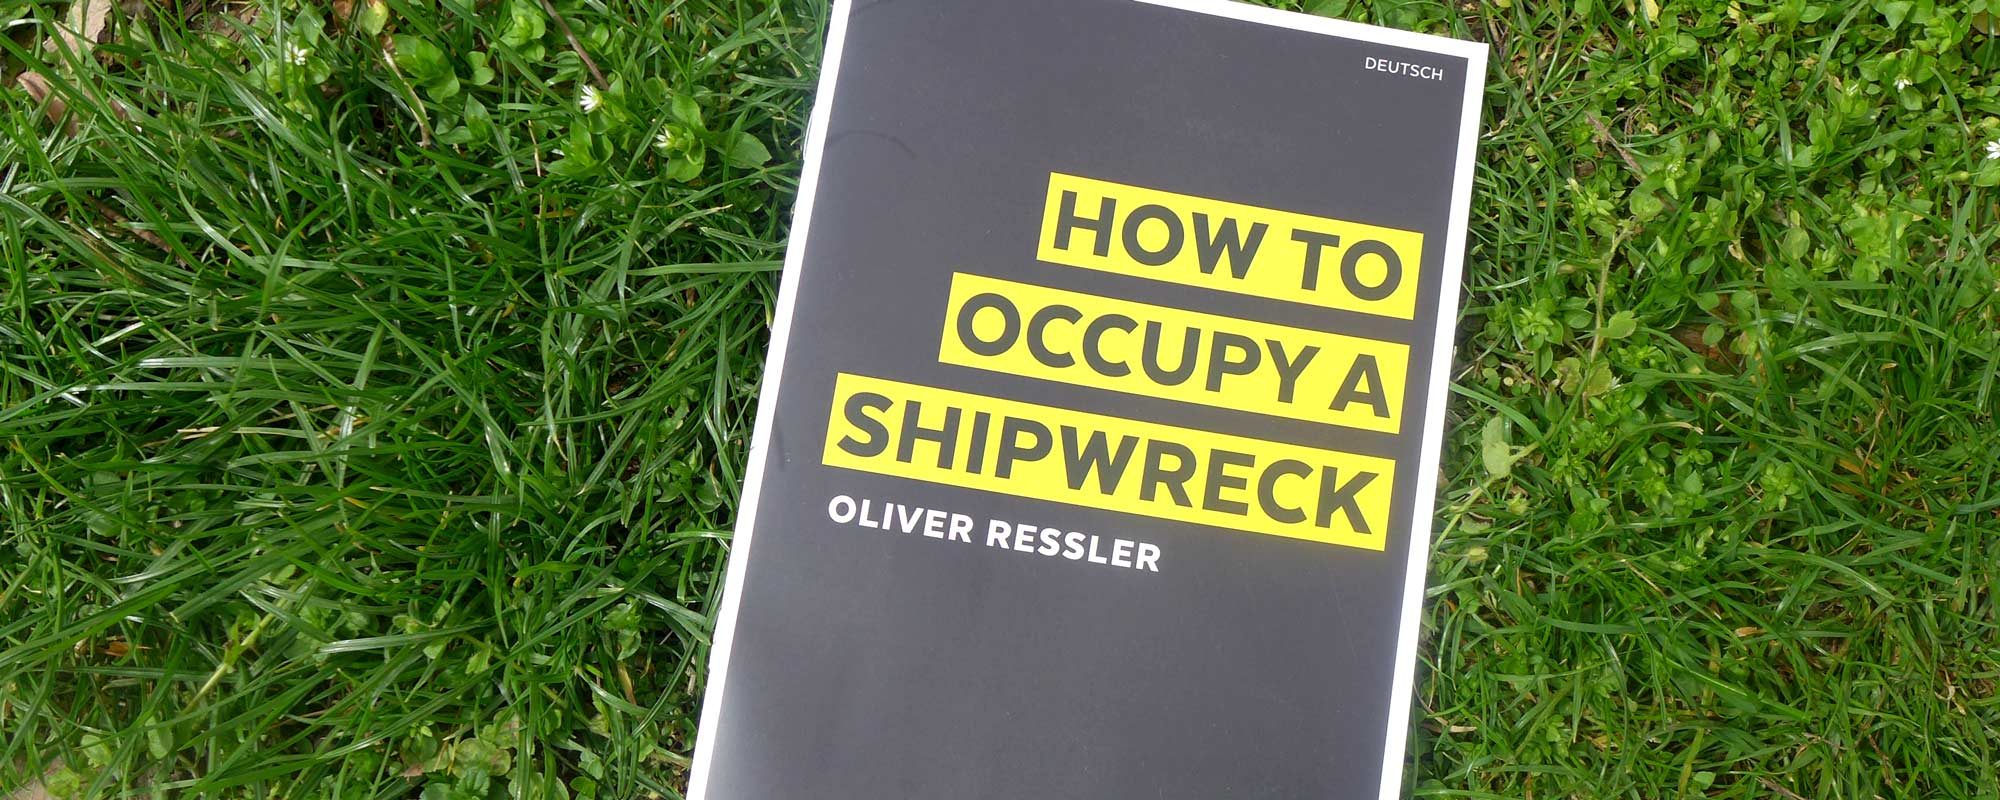 How To Occupy A Shipwreck